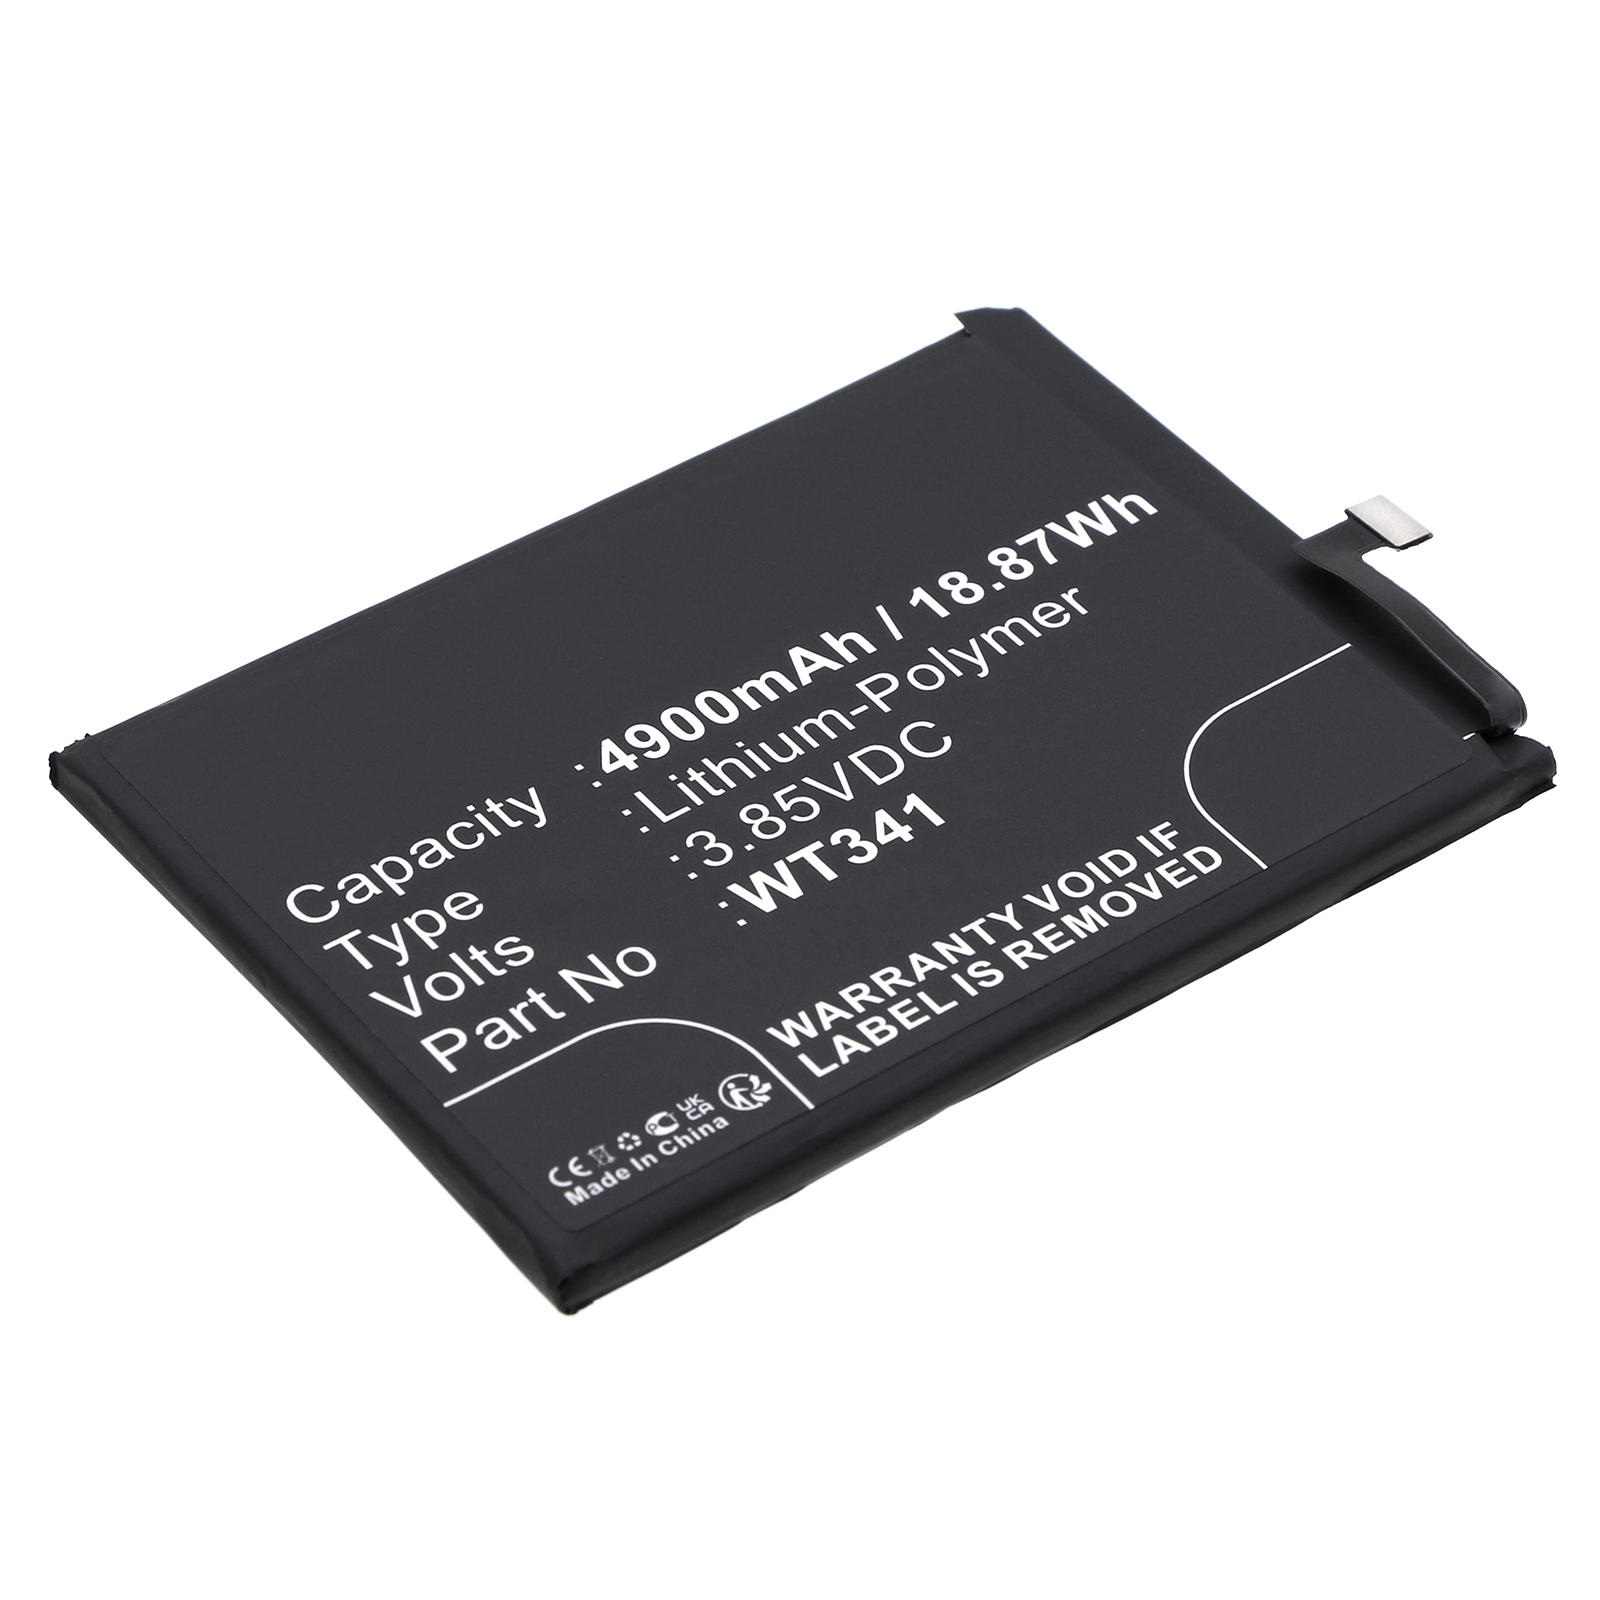 Synergy Digital Cell Phone Battery, Compatible with Nokia WT341 Cell Phone Battery (Li-Pol, 3.85V, 4900mAh)